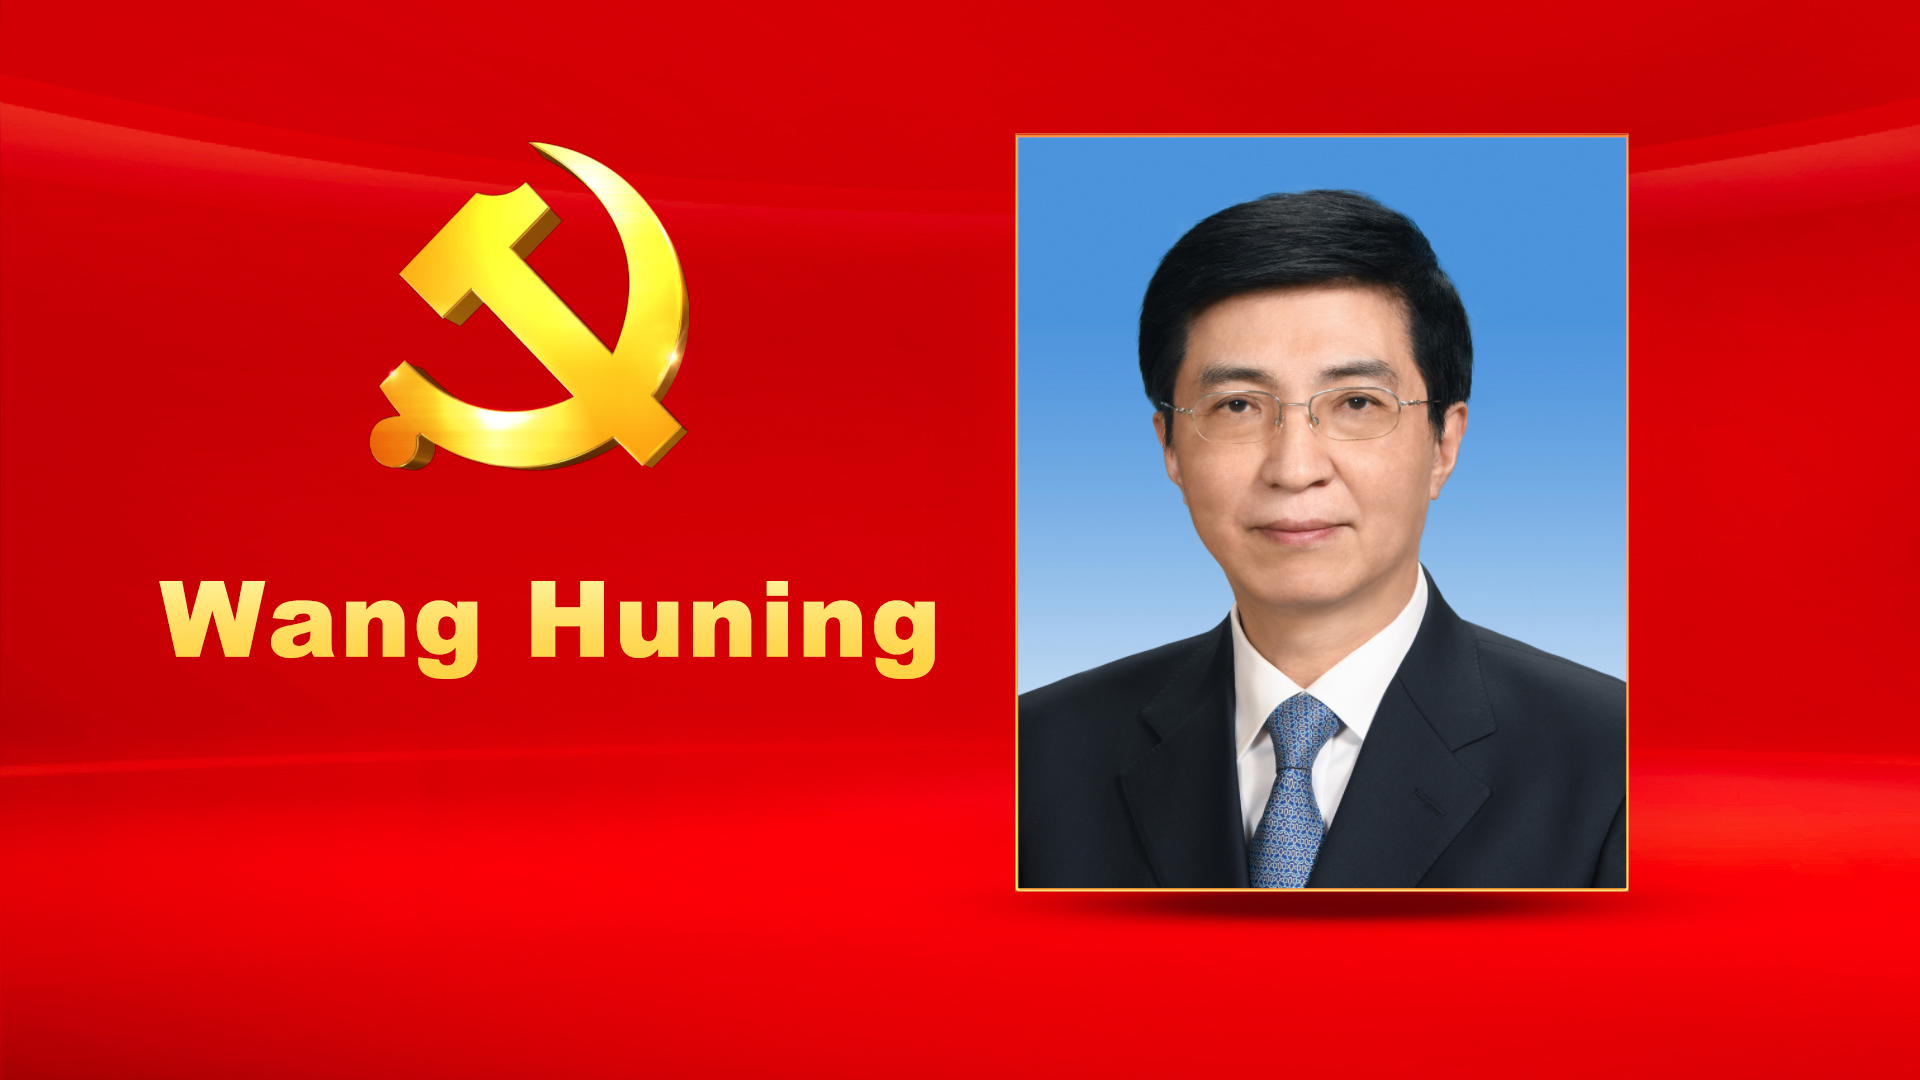 Wang Huning, male, Han ethnicity, was born in October 1955 and is from Laizhou, Shandong Province. He began his first job in February 1977 and joined the Communist Party of China (CPC) in April 1984. Wang graduated from Department of International Politics, Fudan University where he completed a graduate program in international politics and was awarded a Master of Laws degree. He holds a professional title of professor. Wang is currently a member of the Standing Committee of the CPC Central Committee Political Bureau and Director of the Office of the Central Commission for Deepening Reform.